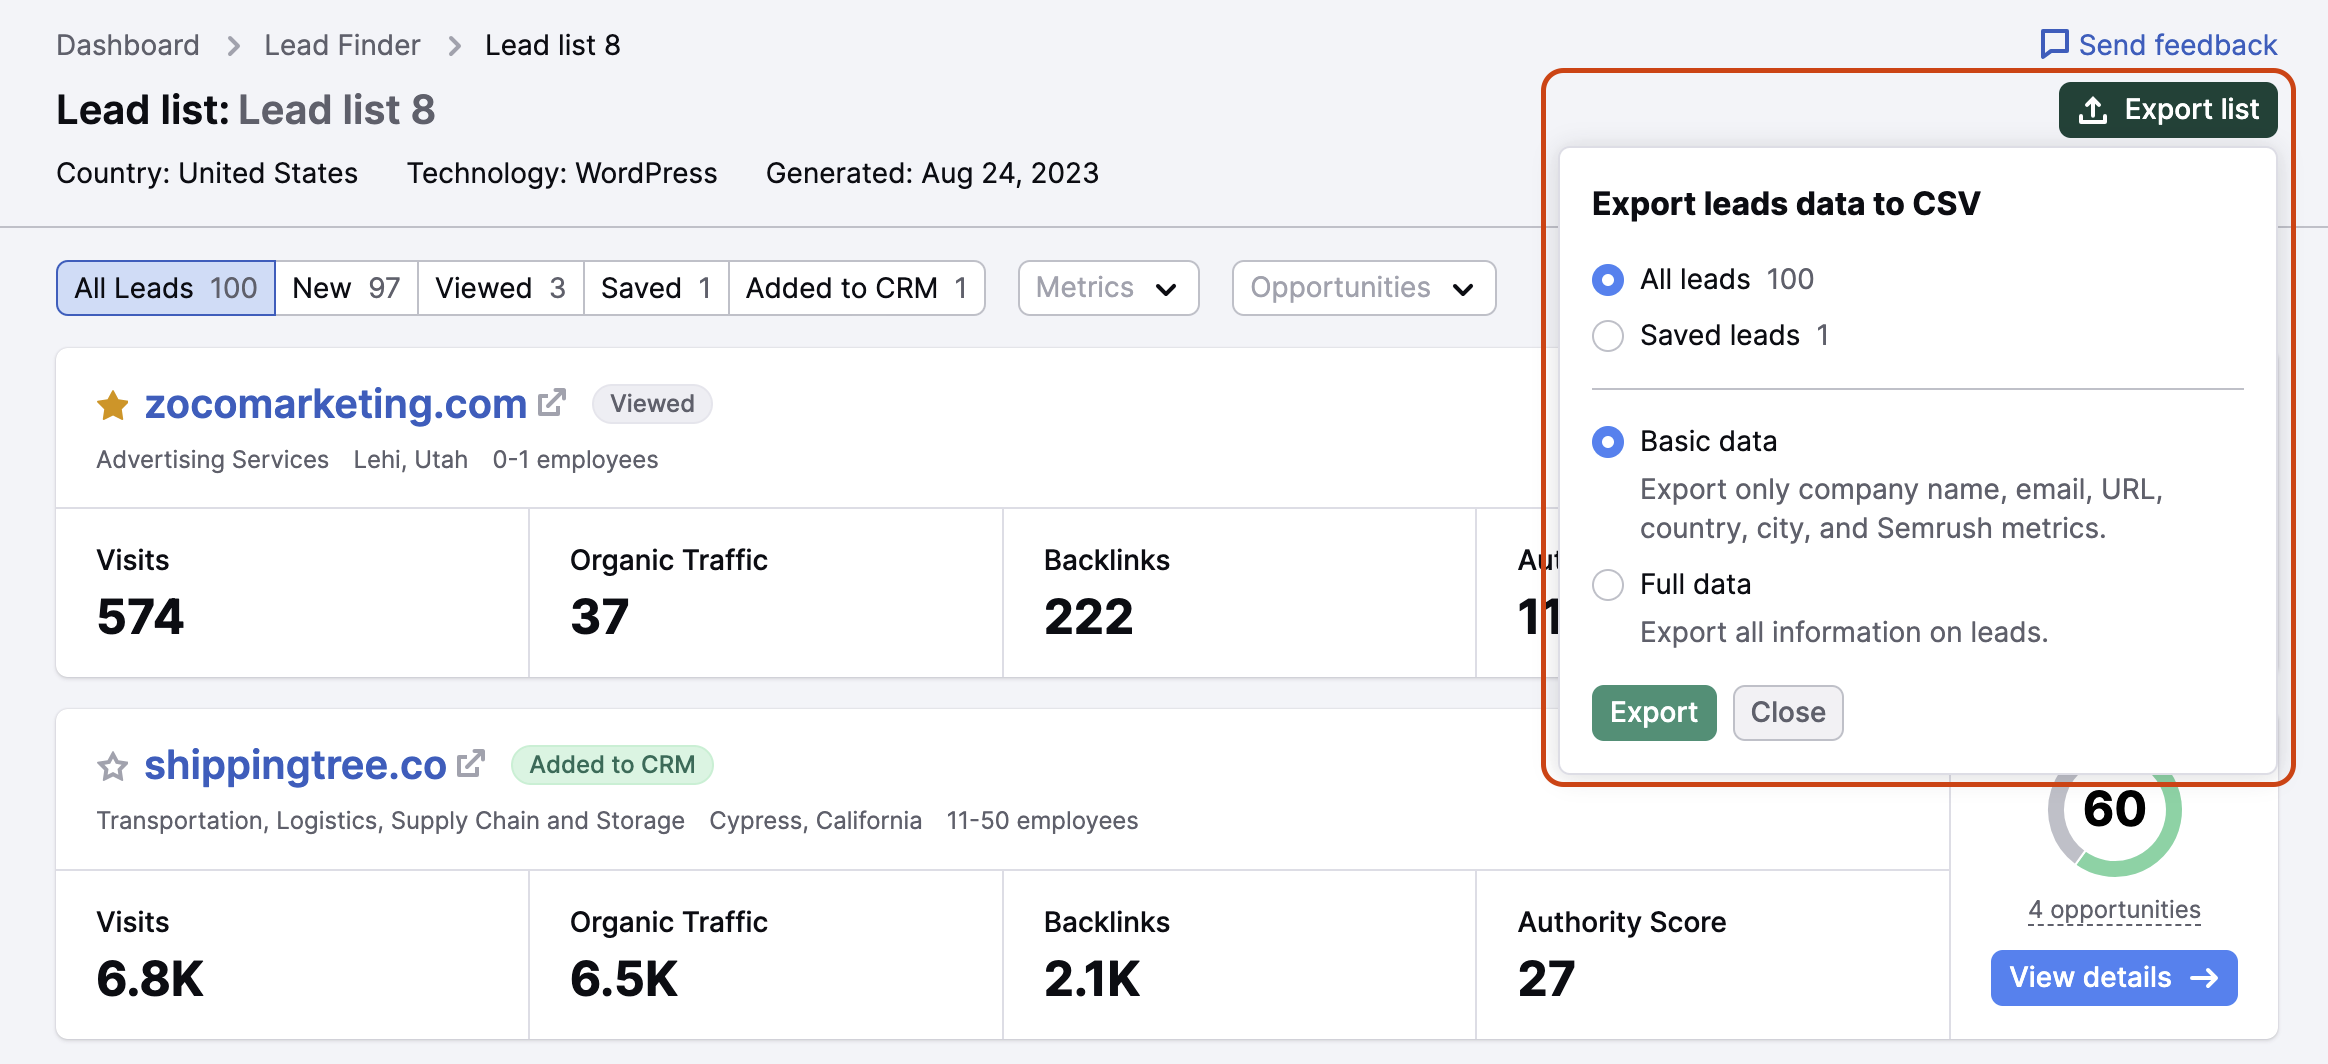 Export list button in the upper right corner opens a dropdown menu with all available export options circled with red. Only CSV exports are available, but there is a choice between Basic data and Full data. Basic data is selected in this example and consists of company name, email, URL, country, city, and Semrush metrics.